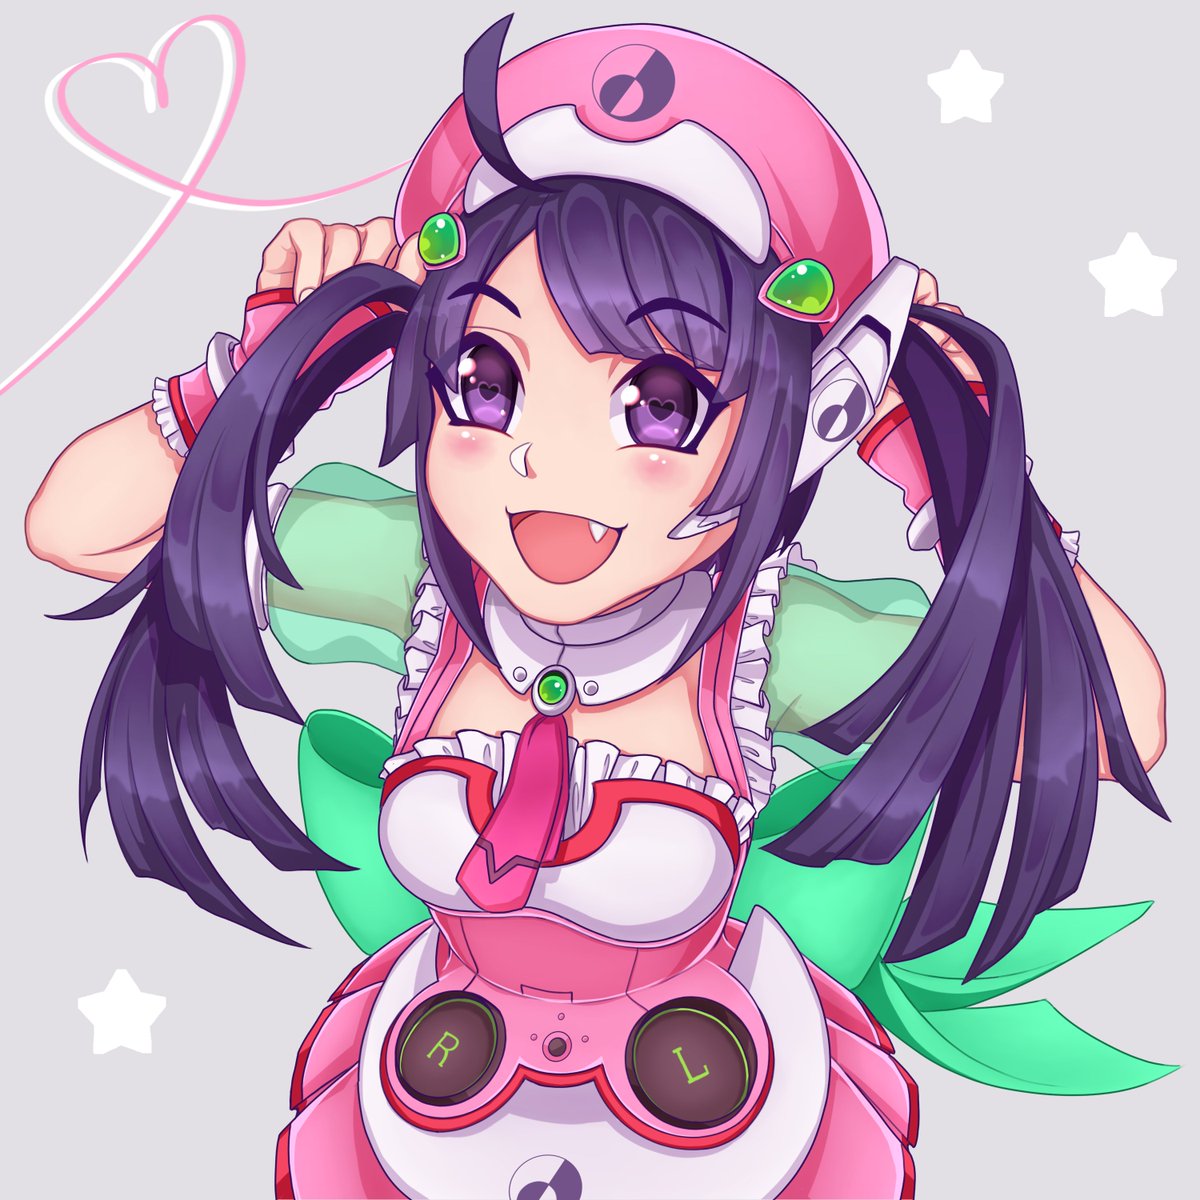 Minka Happy 9th Anniversairy Tone Rion This Is My Piece For The Matsurioncollab Matsurion Matsurion 祭りおん 兎眠りおん誕生祭 T Co G6llkxealo